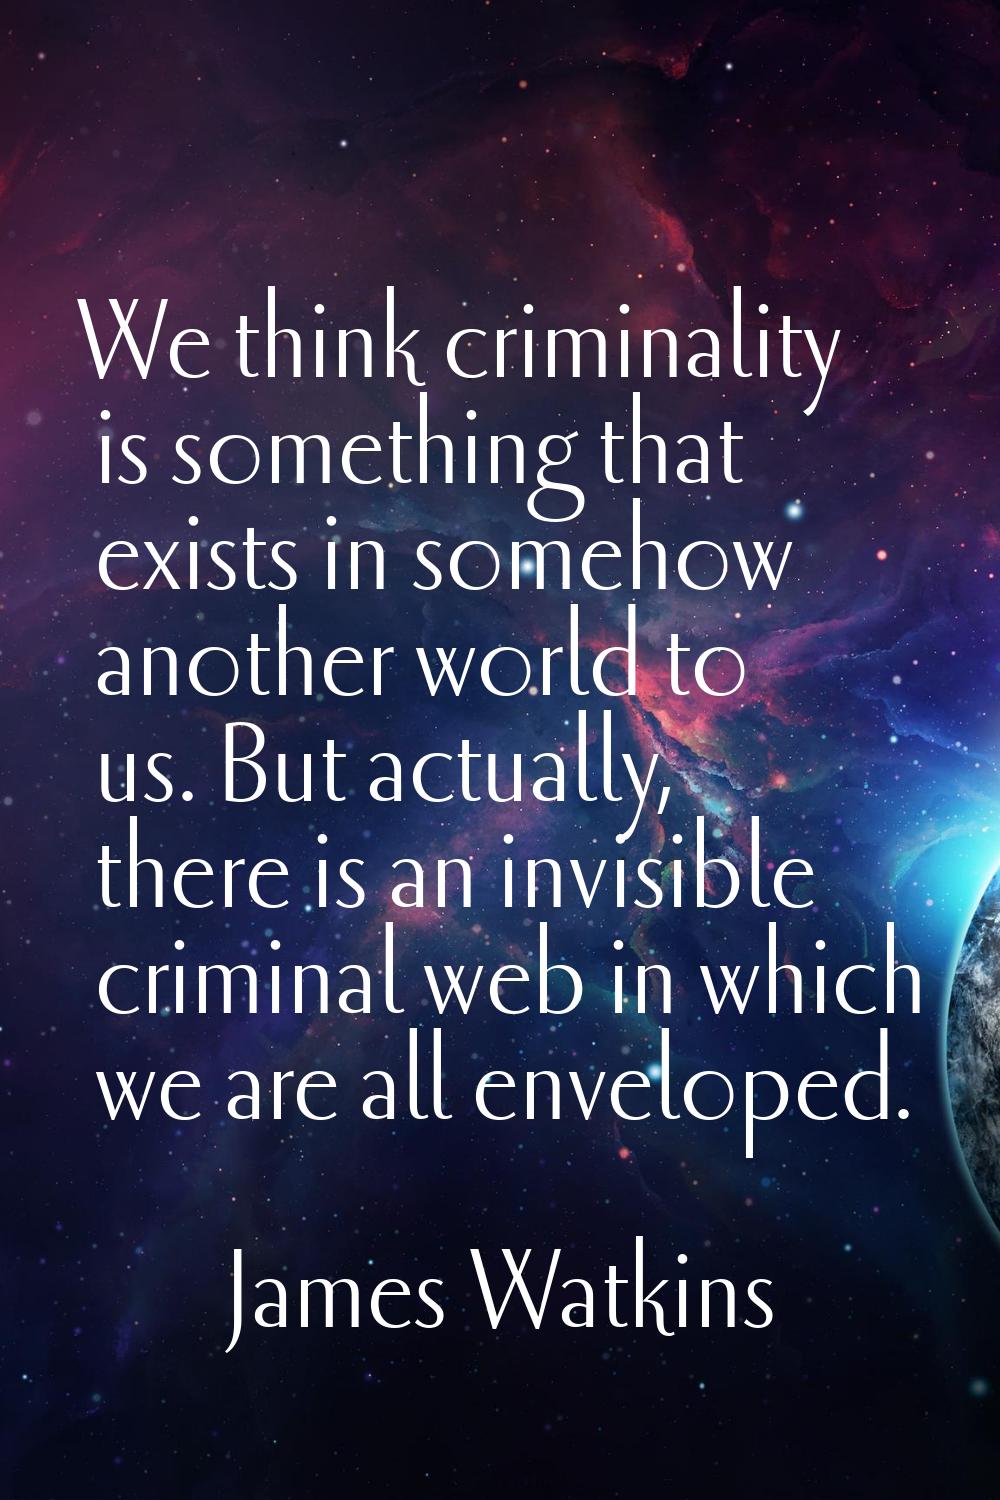 We think criminality is something that exists in somehow another world to us. But actually, there i